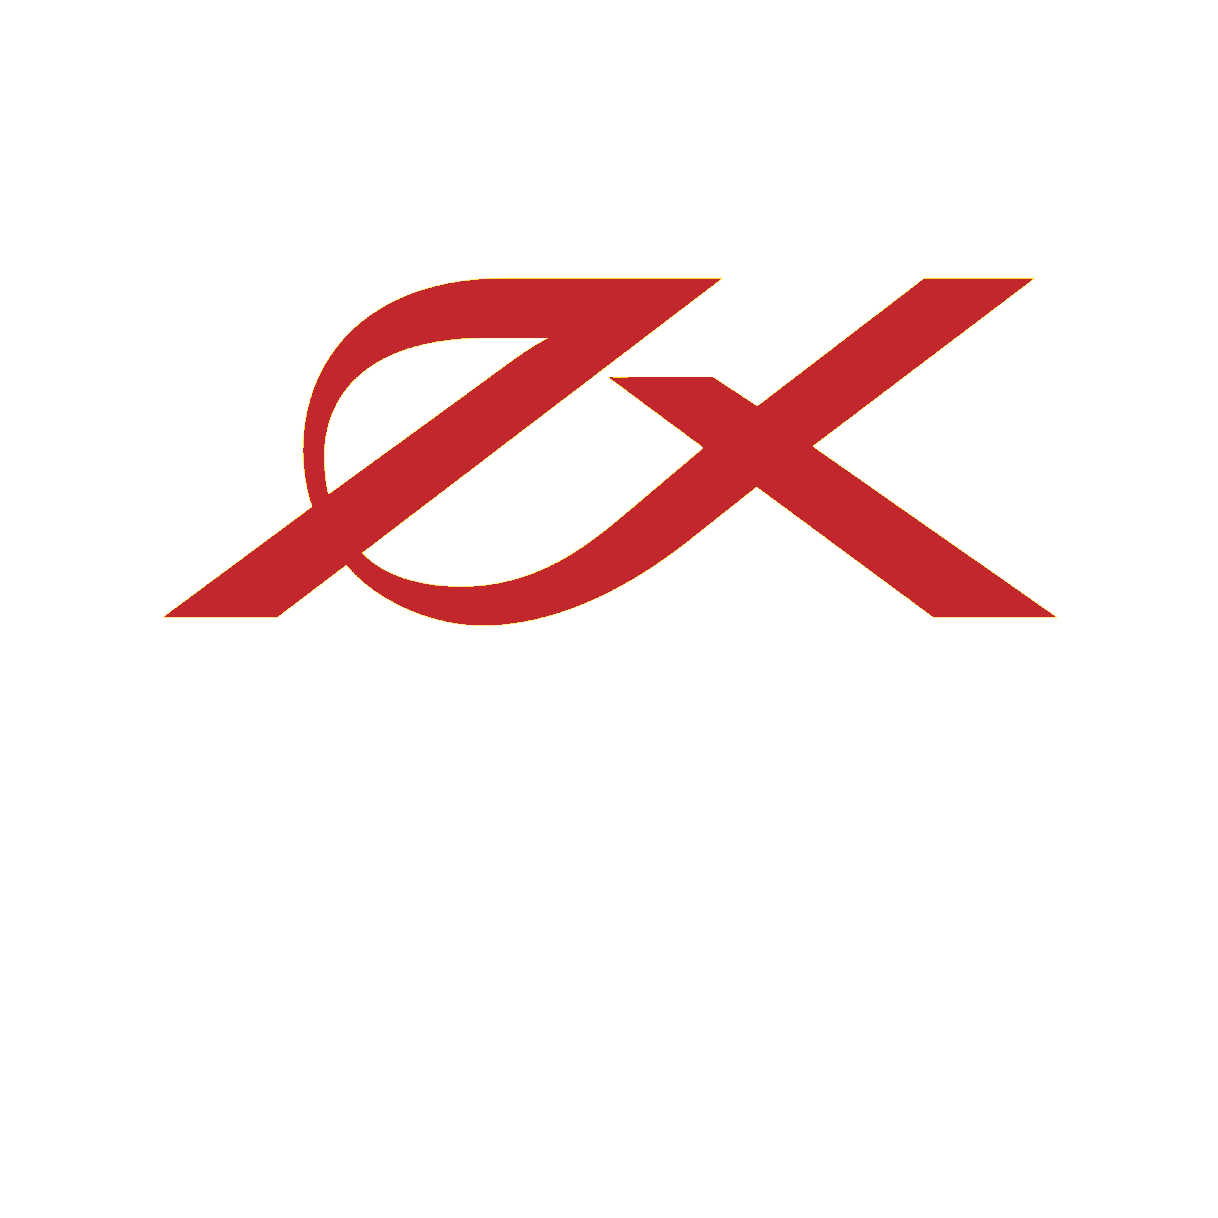 Exness Broker in Morocco